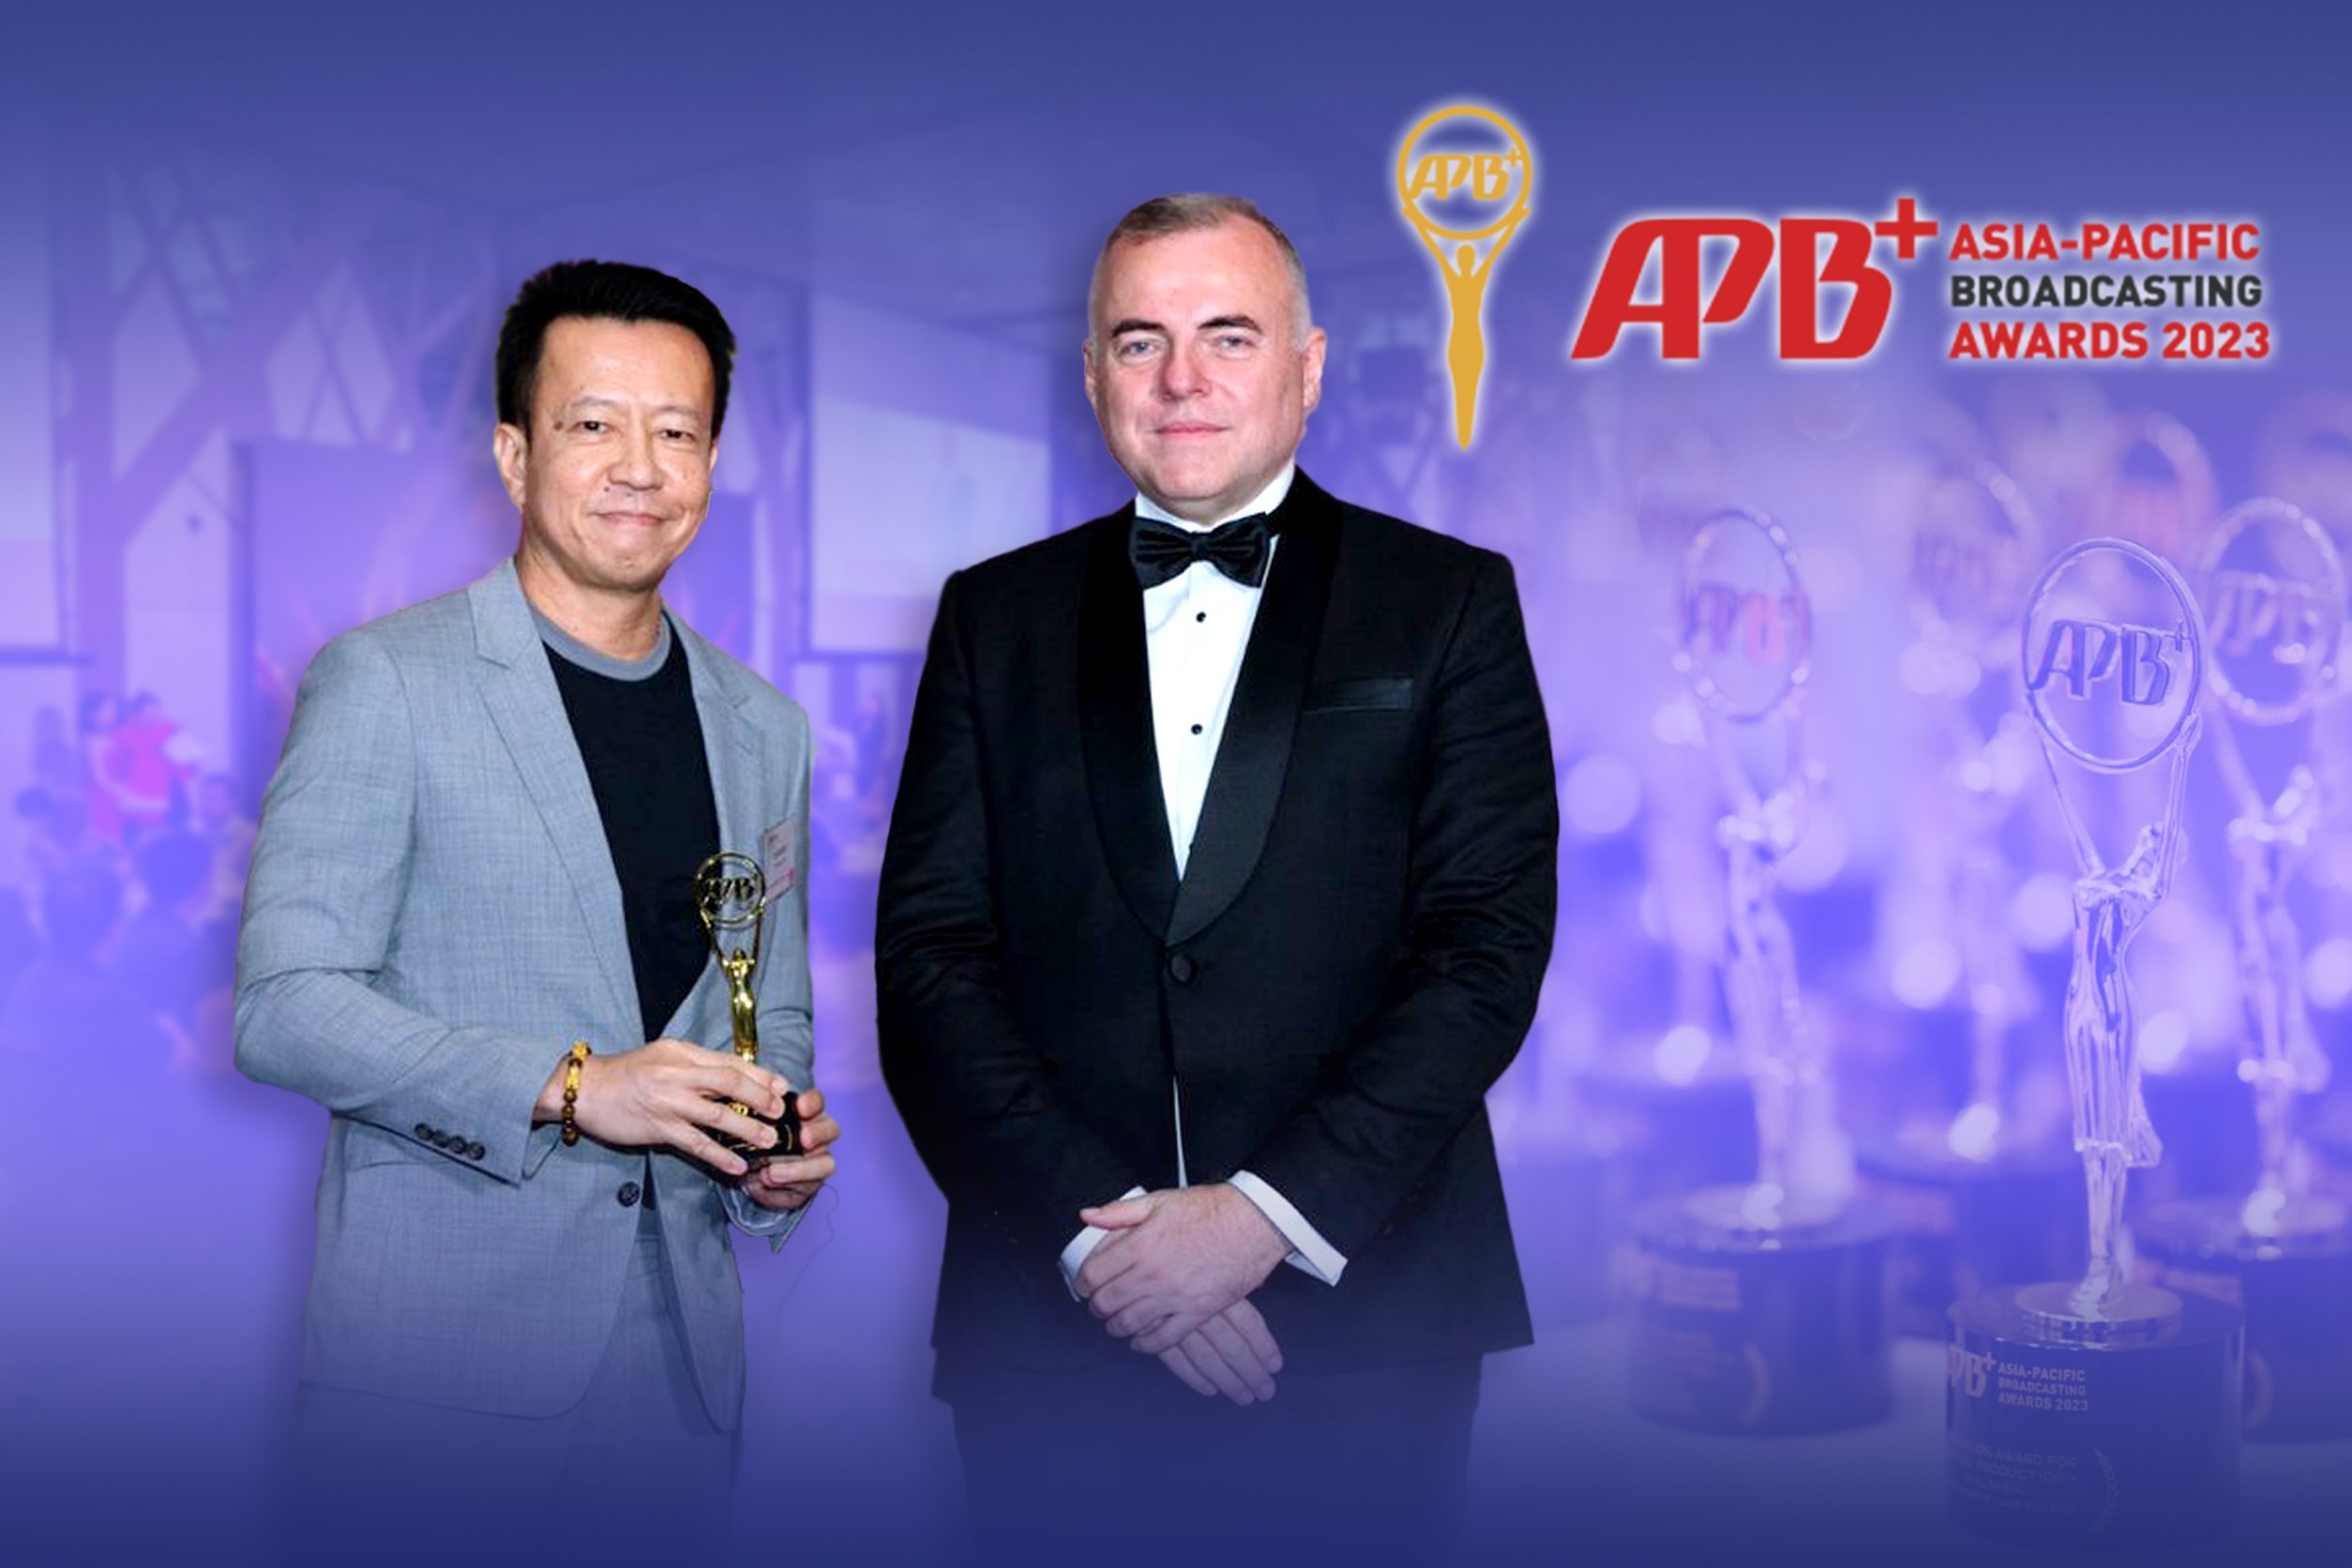 BEC World Honored at Asia-Pacific Broadcasting+ Awards 2023